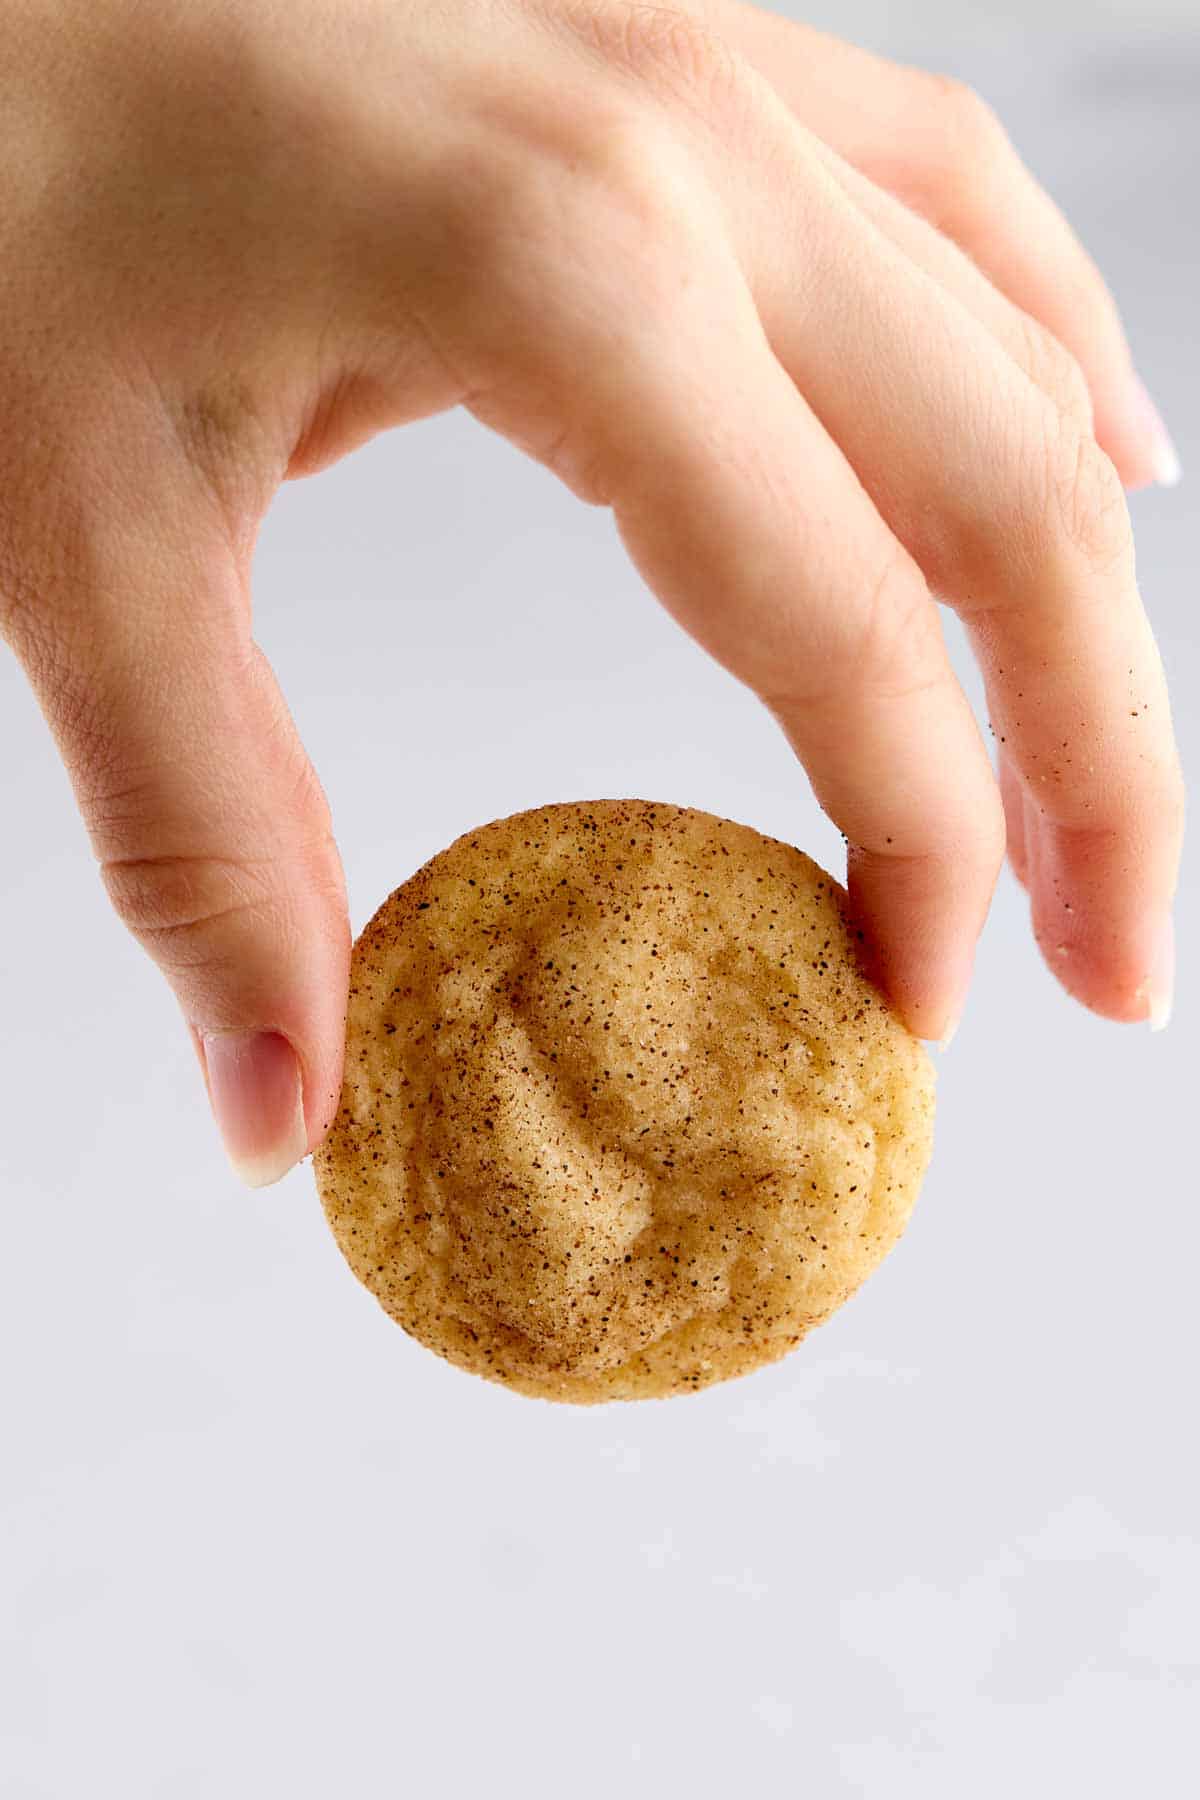 Closeup of fingers holding a mini snickerdoodle to see the small size.